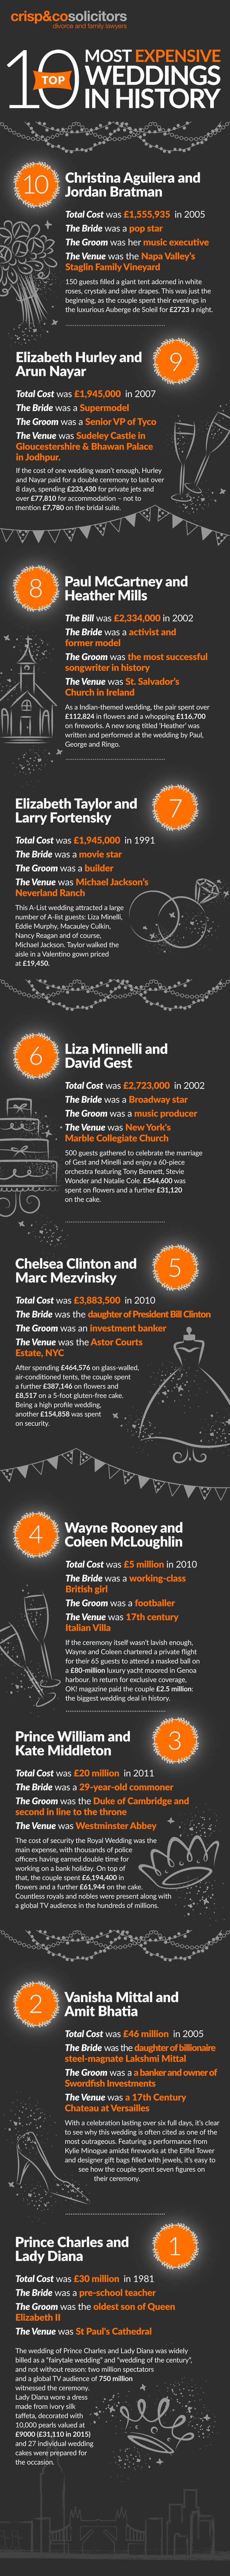 An infographic cataloguing the 10 most expensive weddings in history